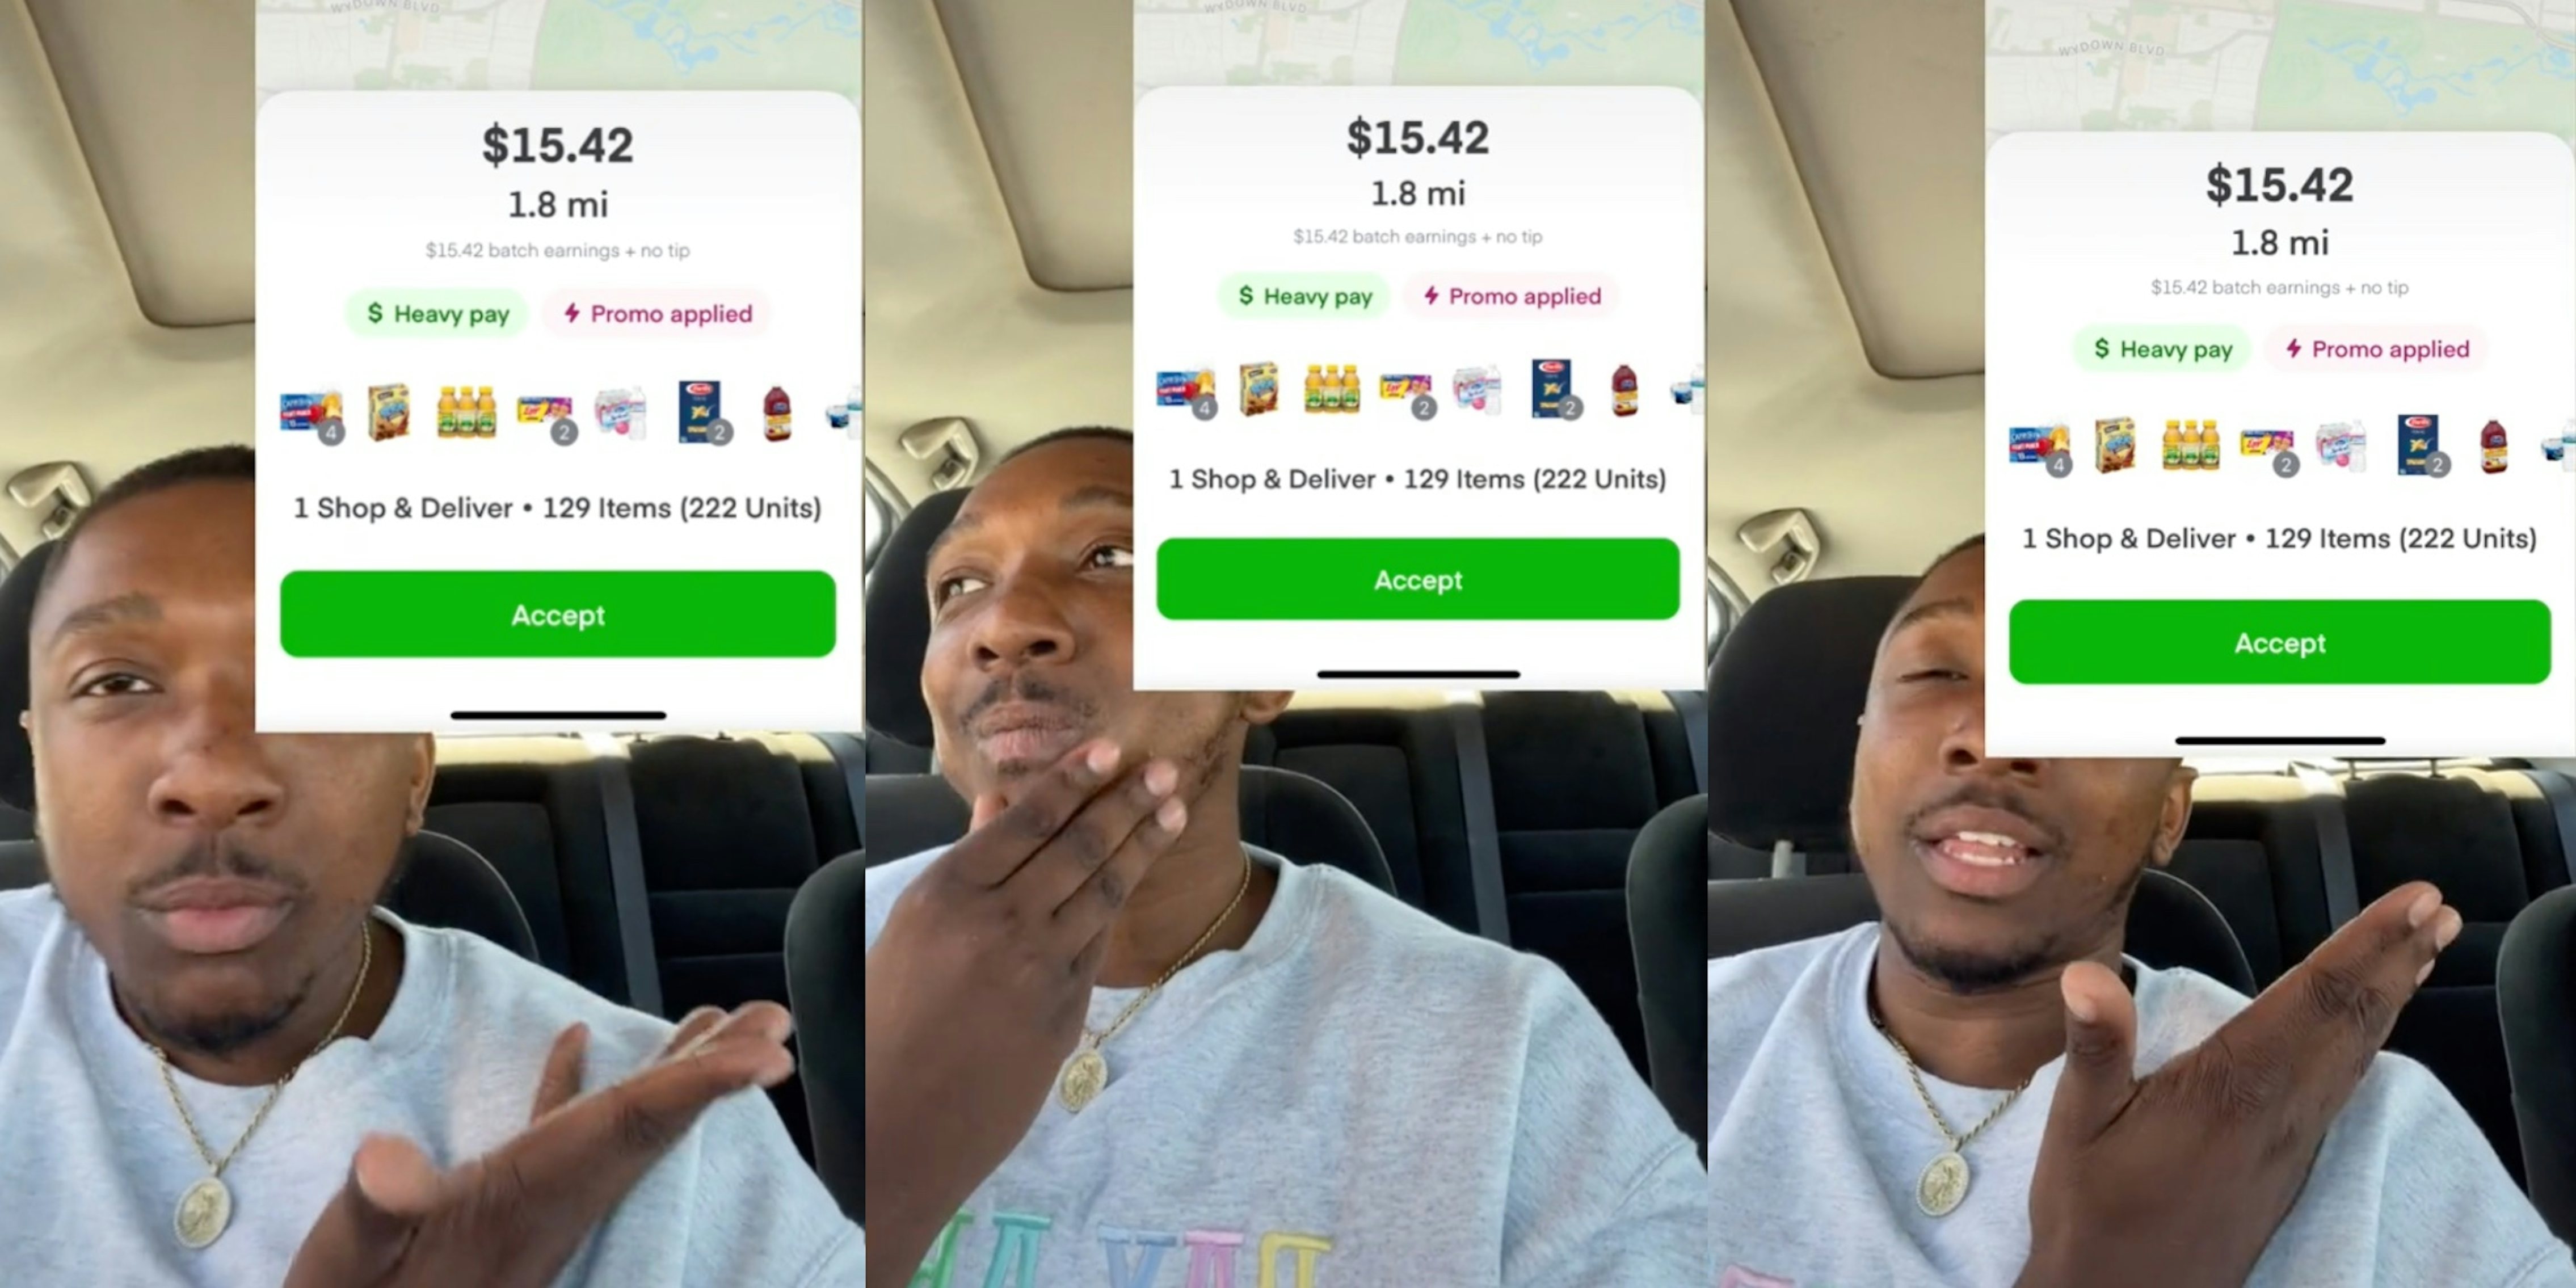 Instacart order overlaid on video of a man in a car